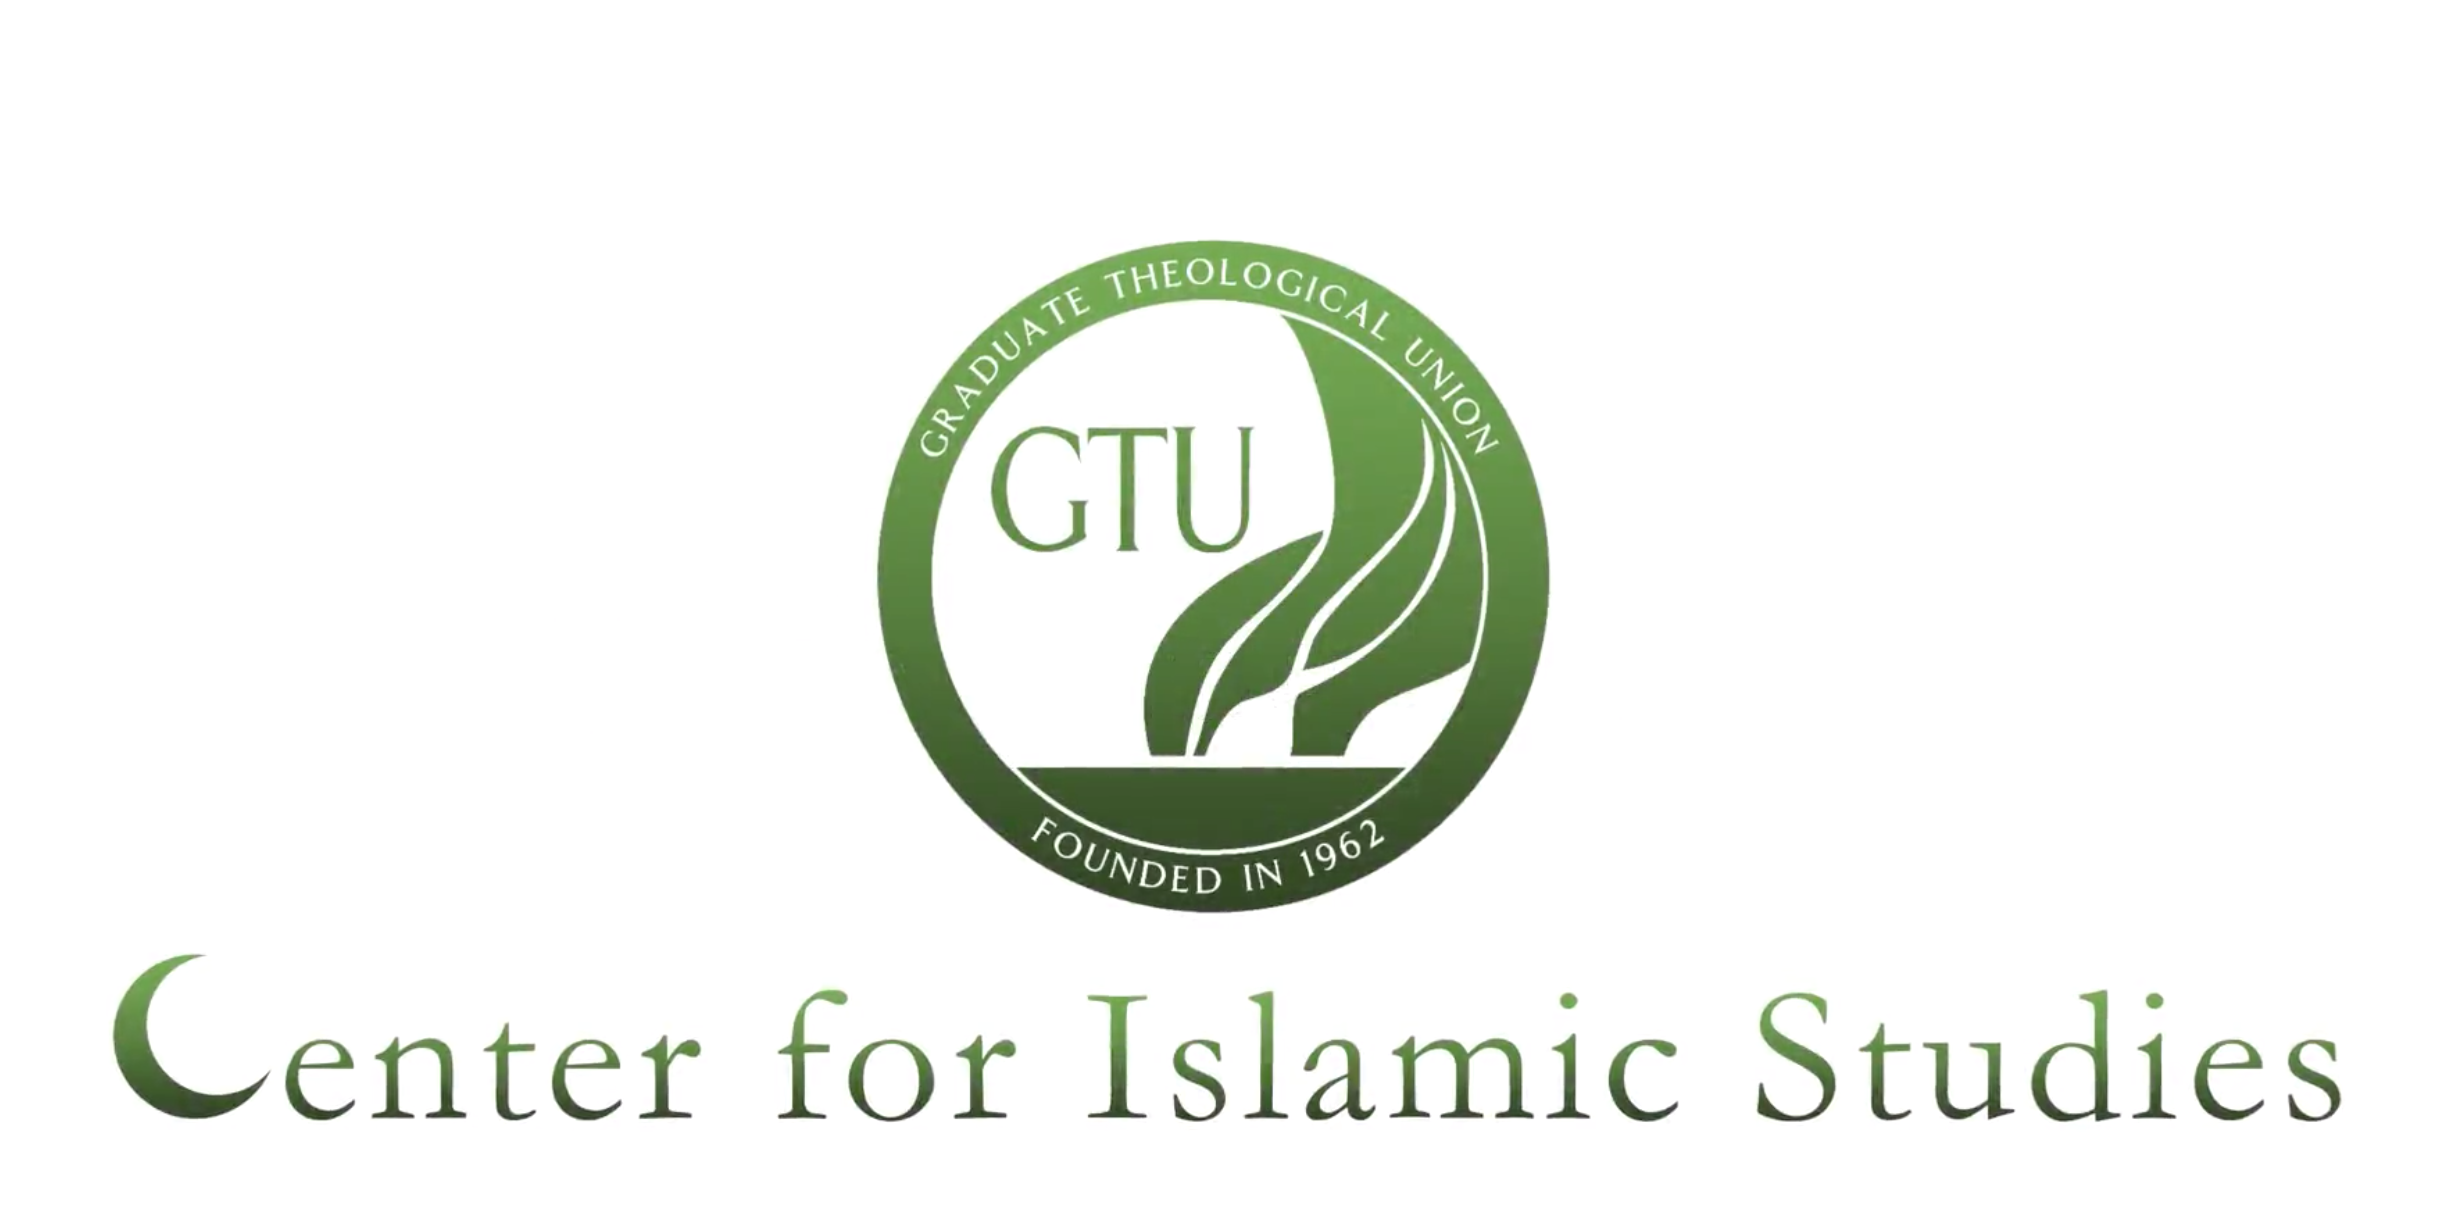 Celebrating 5 Years of the Center for Islamic Studies